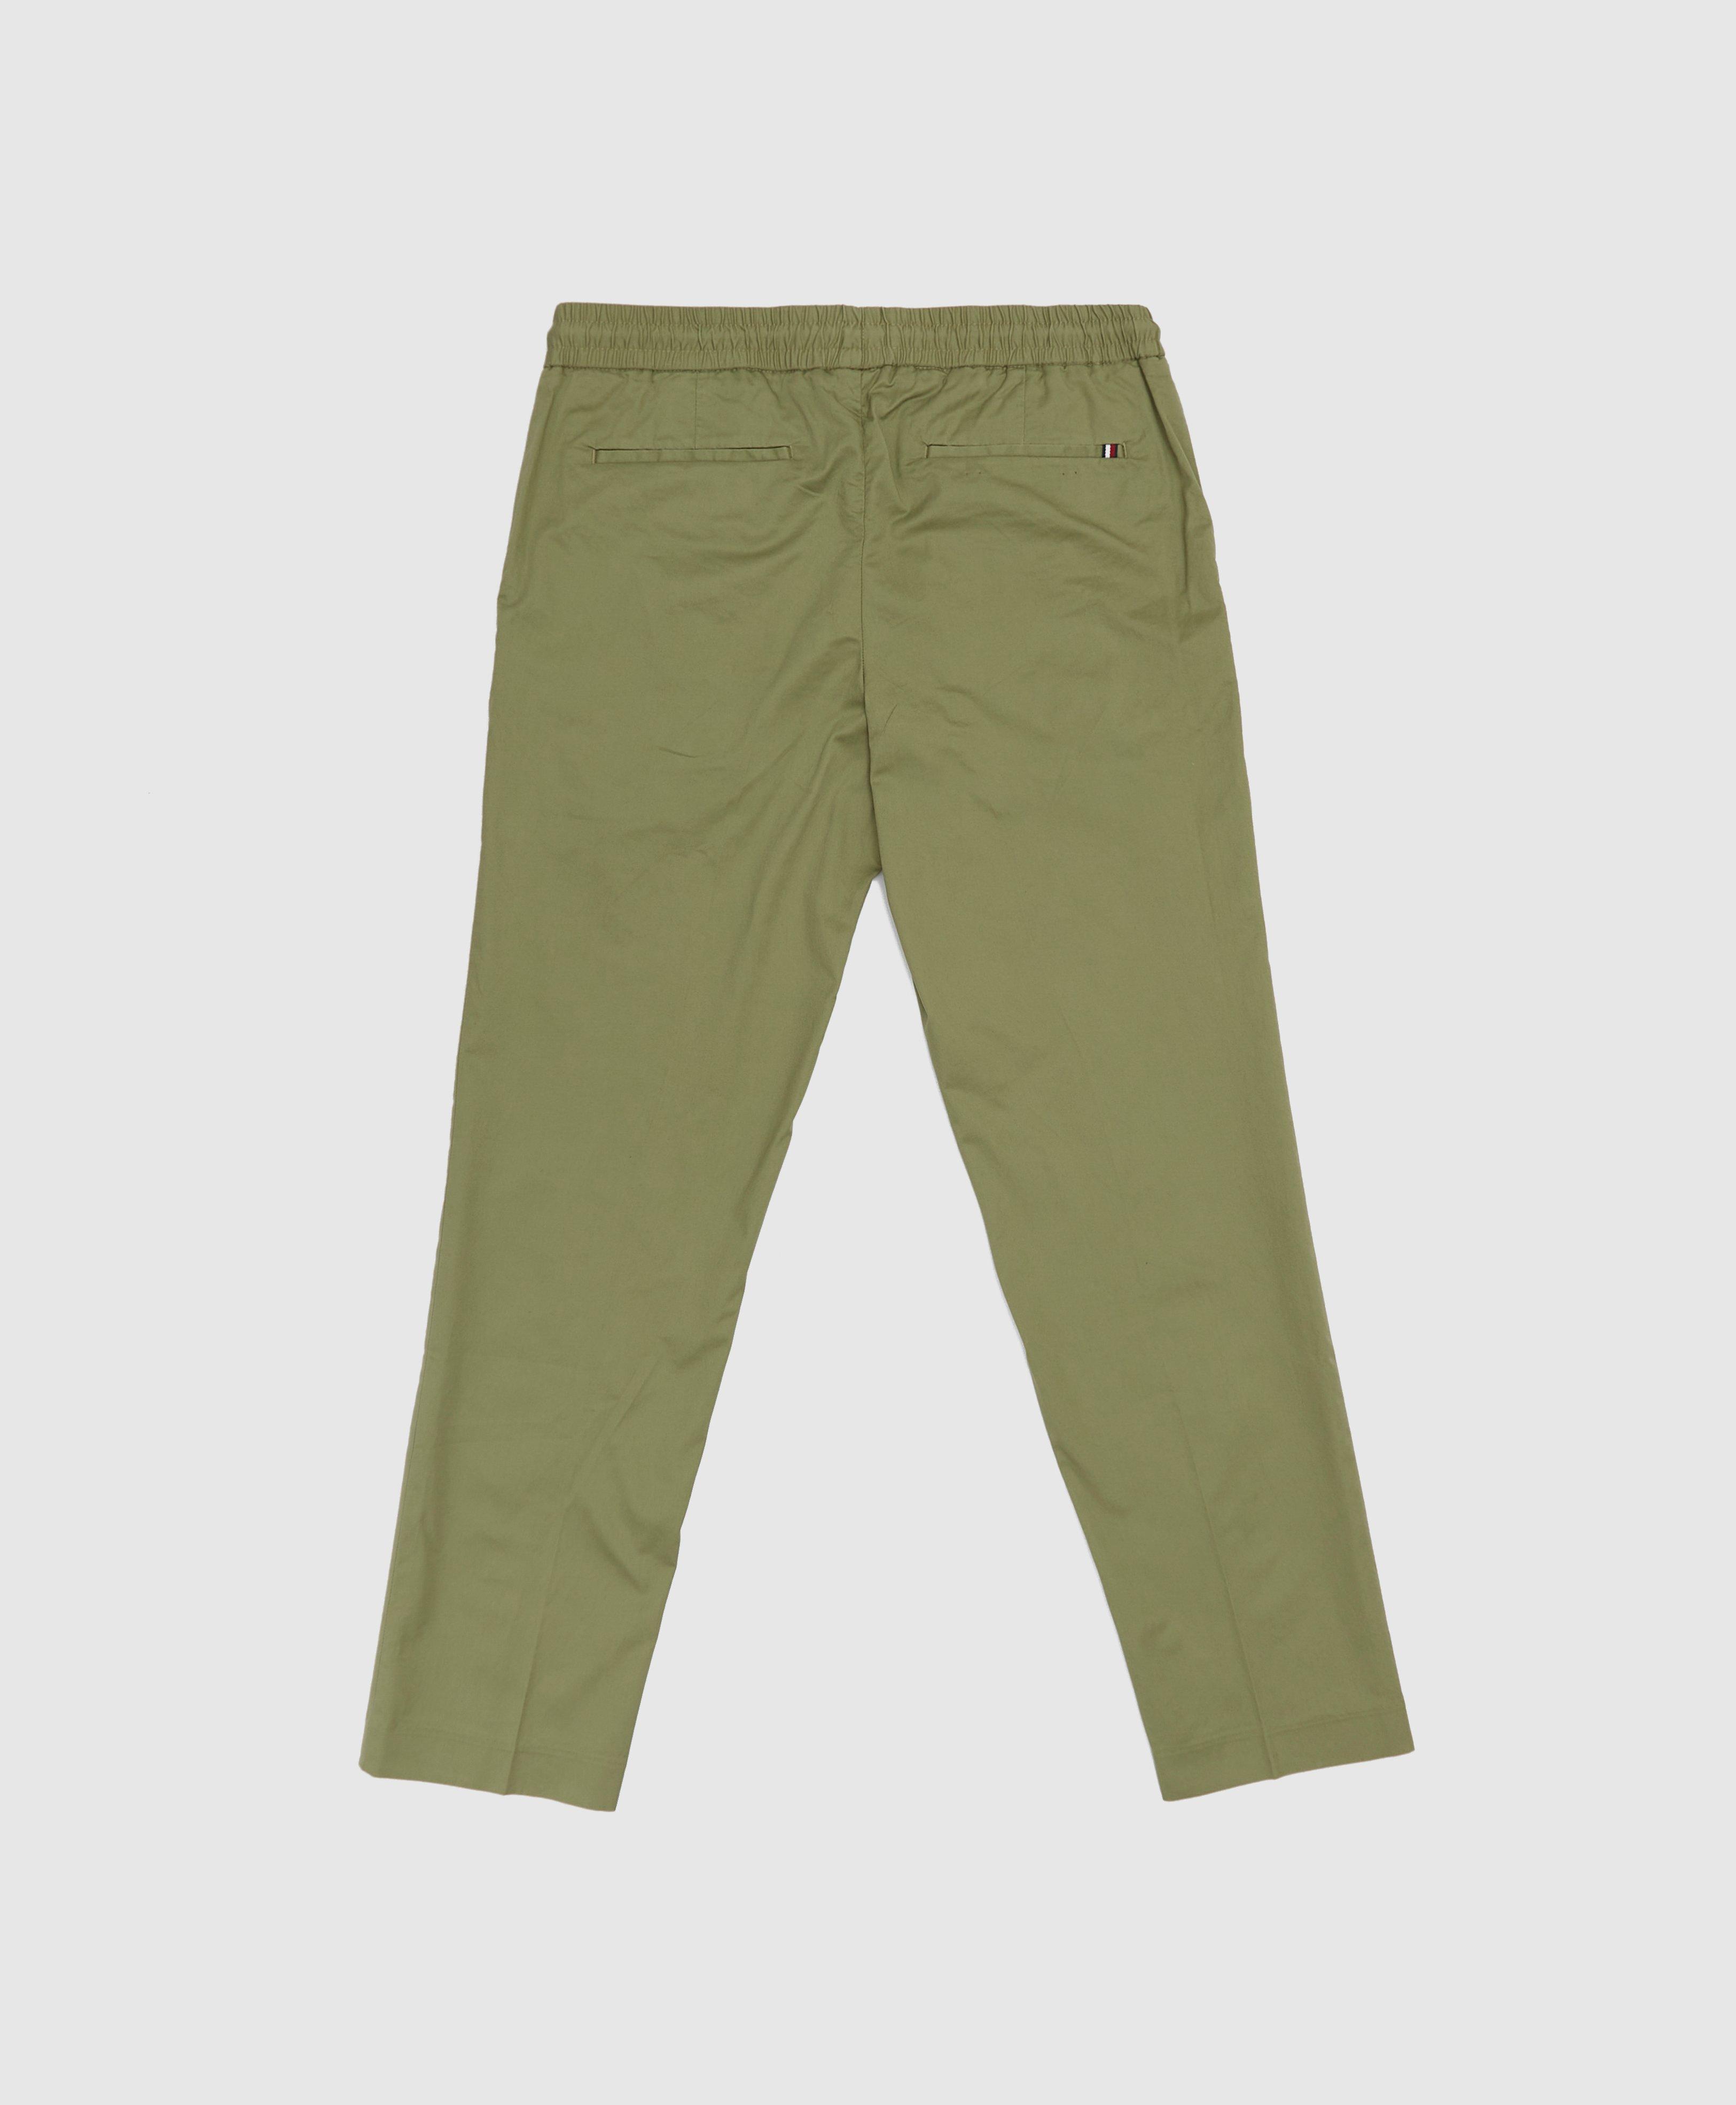 Tommy Hilfiger Twill Drawcord Pants in Green for Men - Lyst